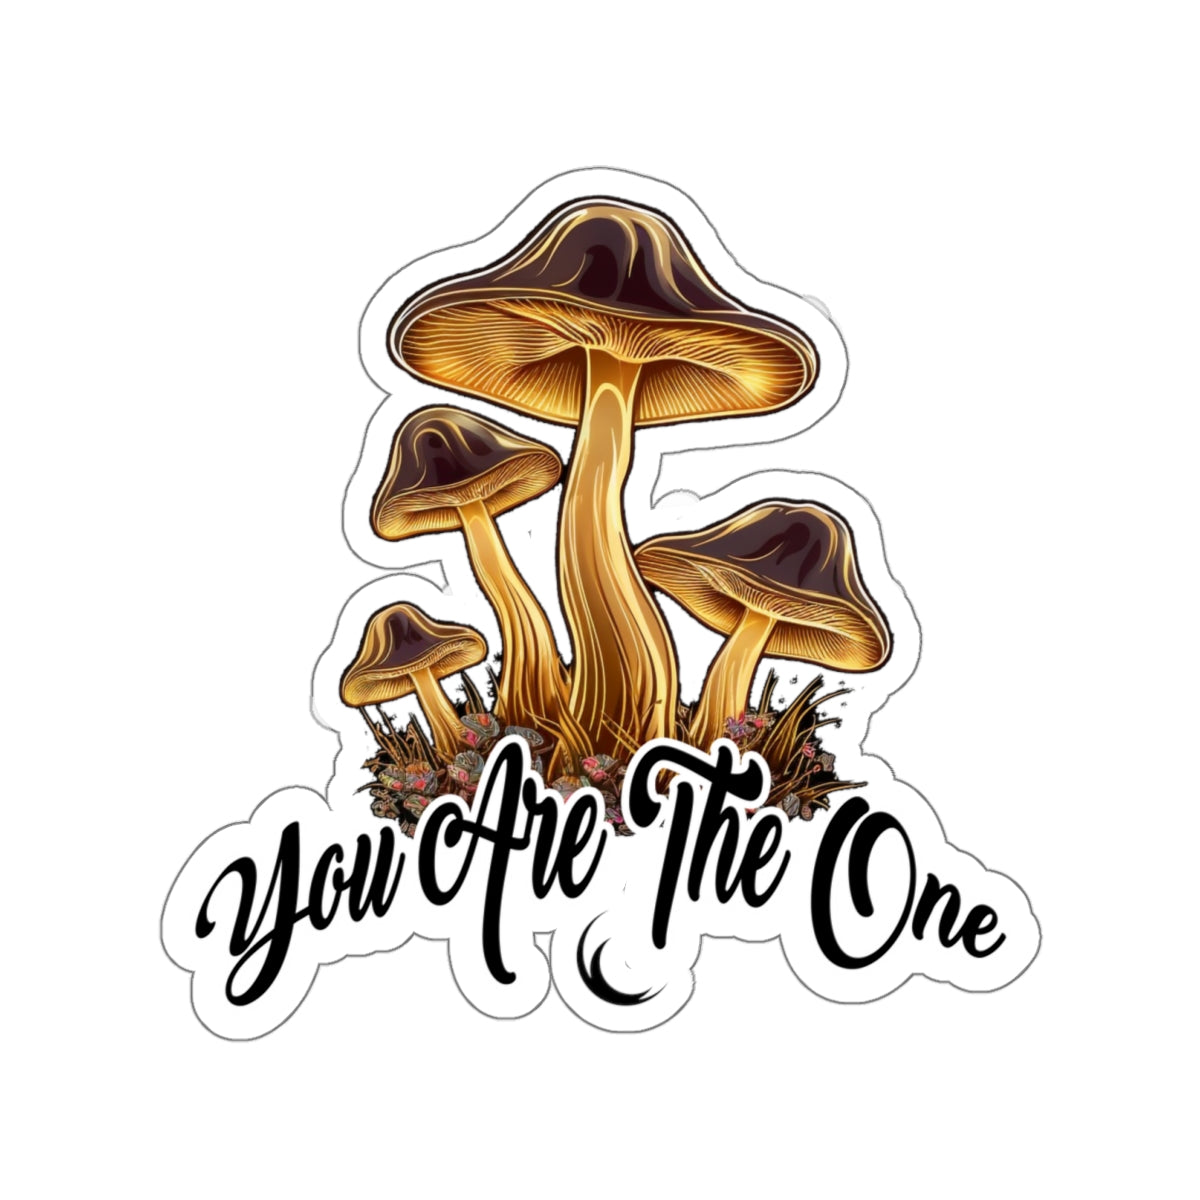 You Are The One - Stickers - Free Shipping!